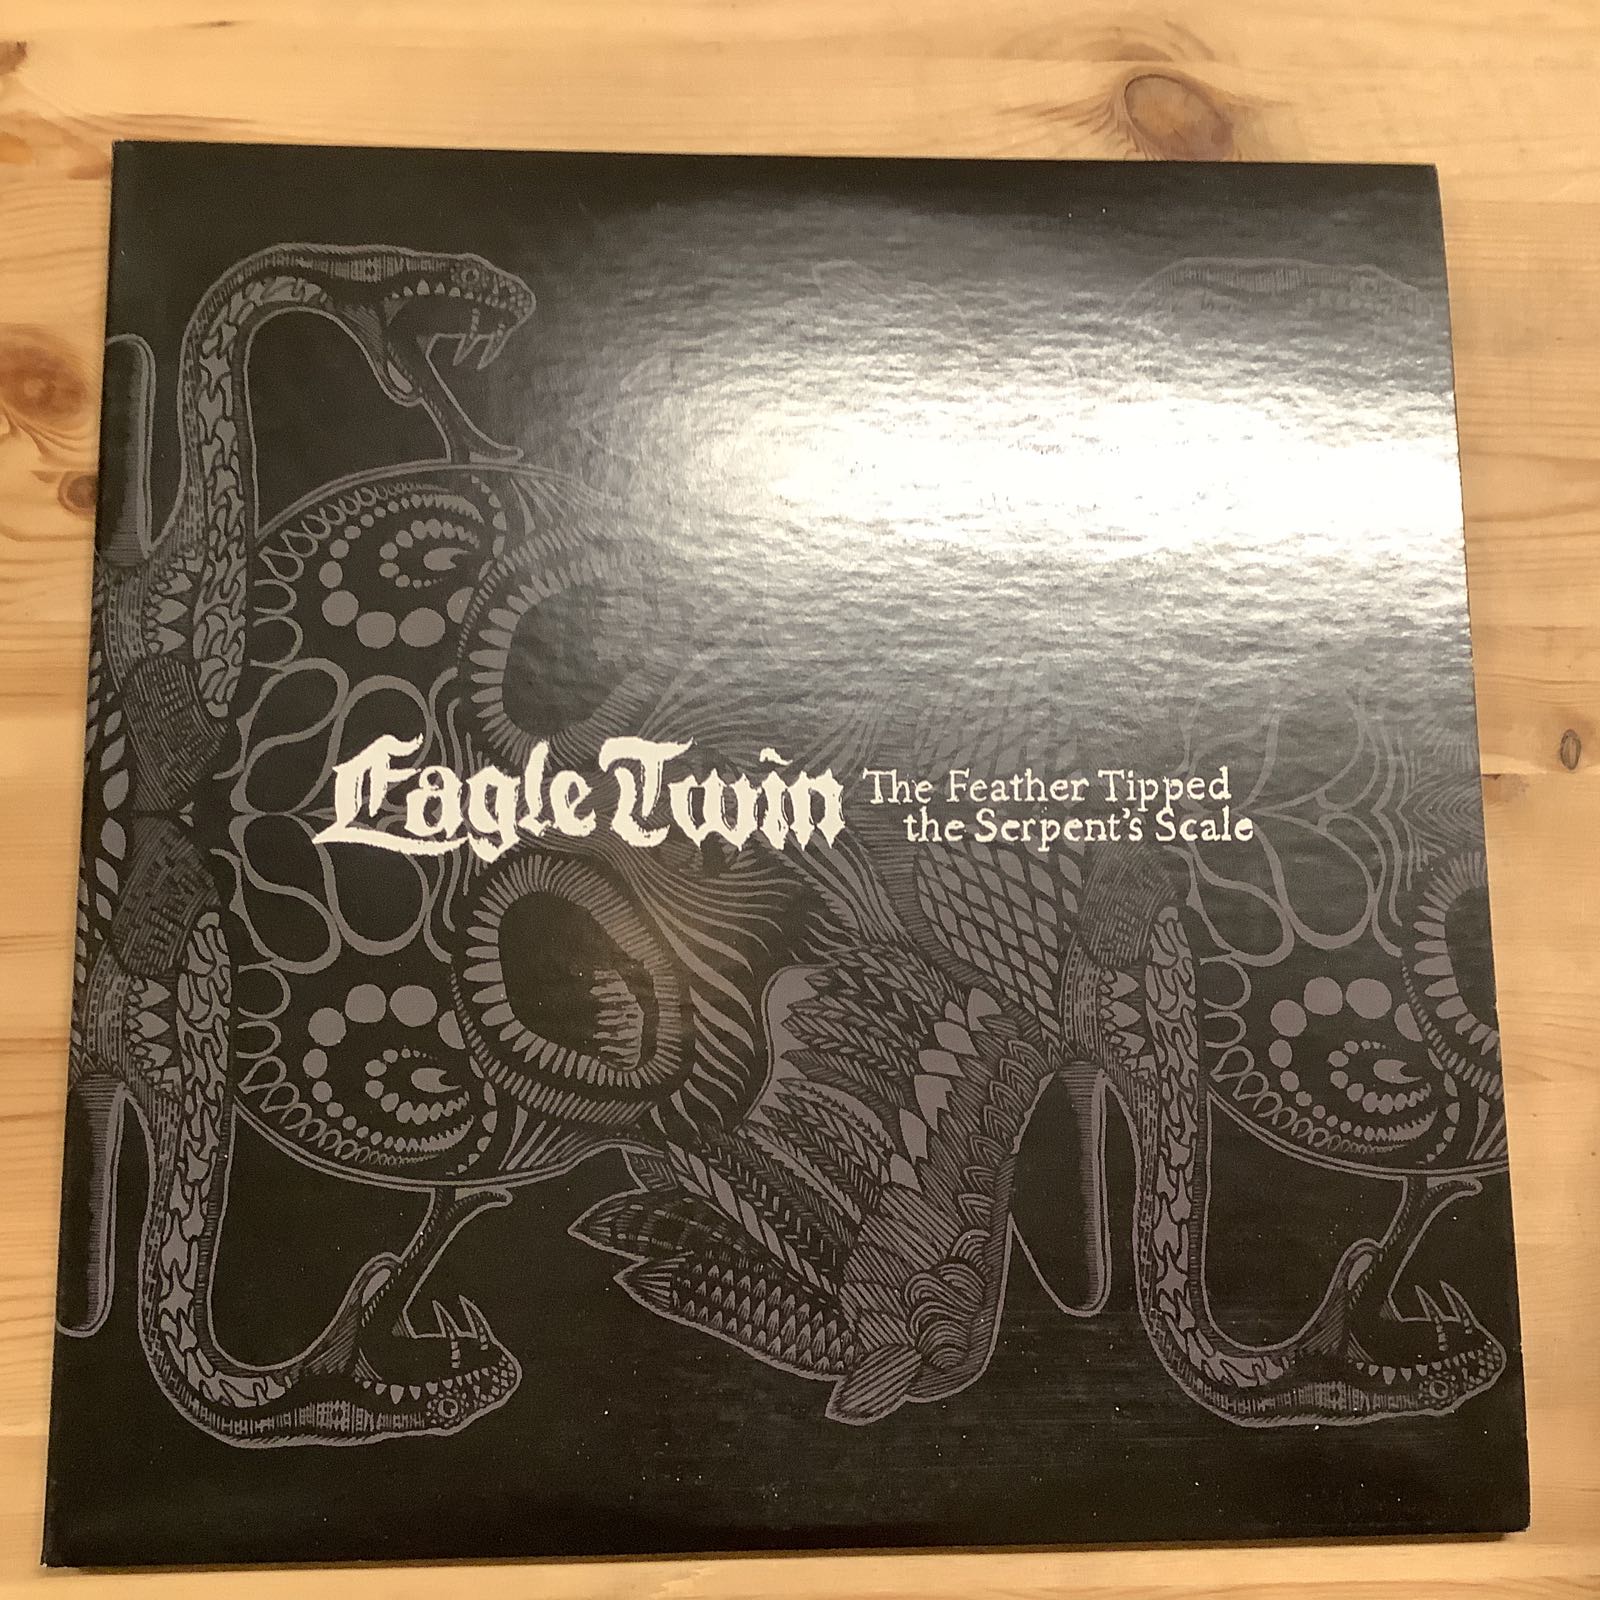 Eagle Twin / Feather Tipped The Serpent’s Scale